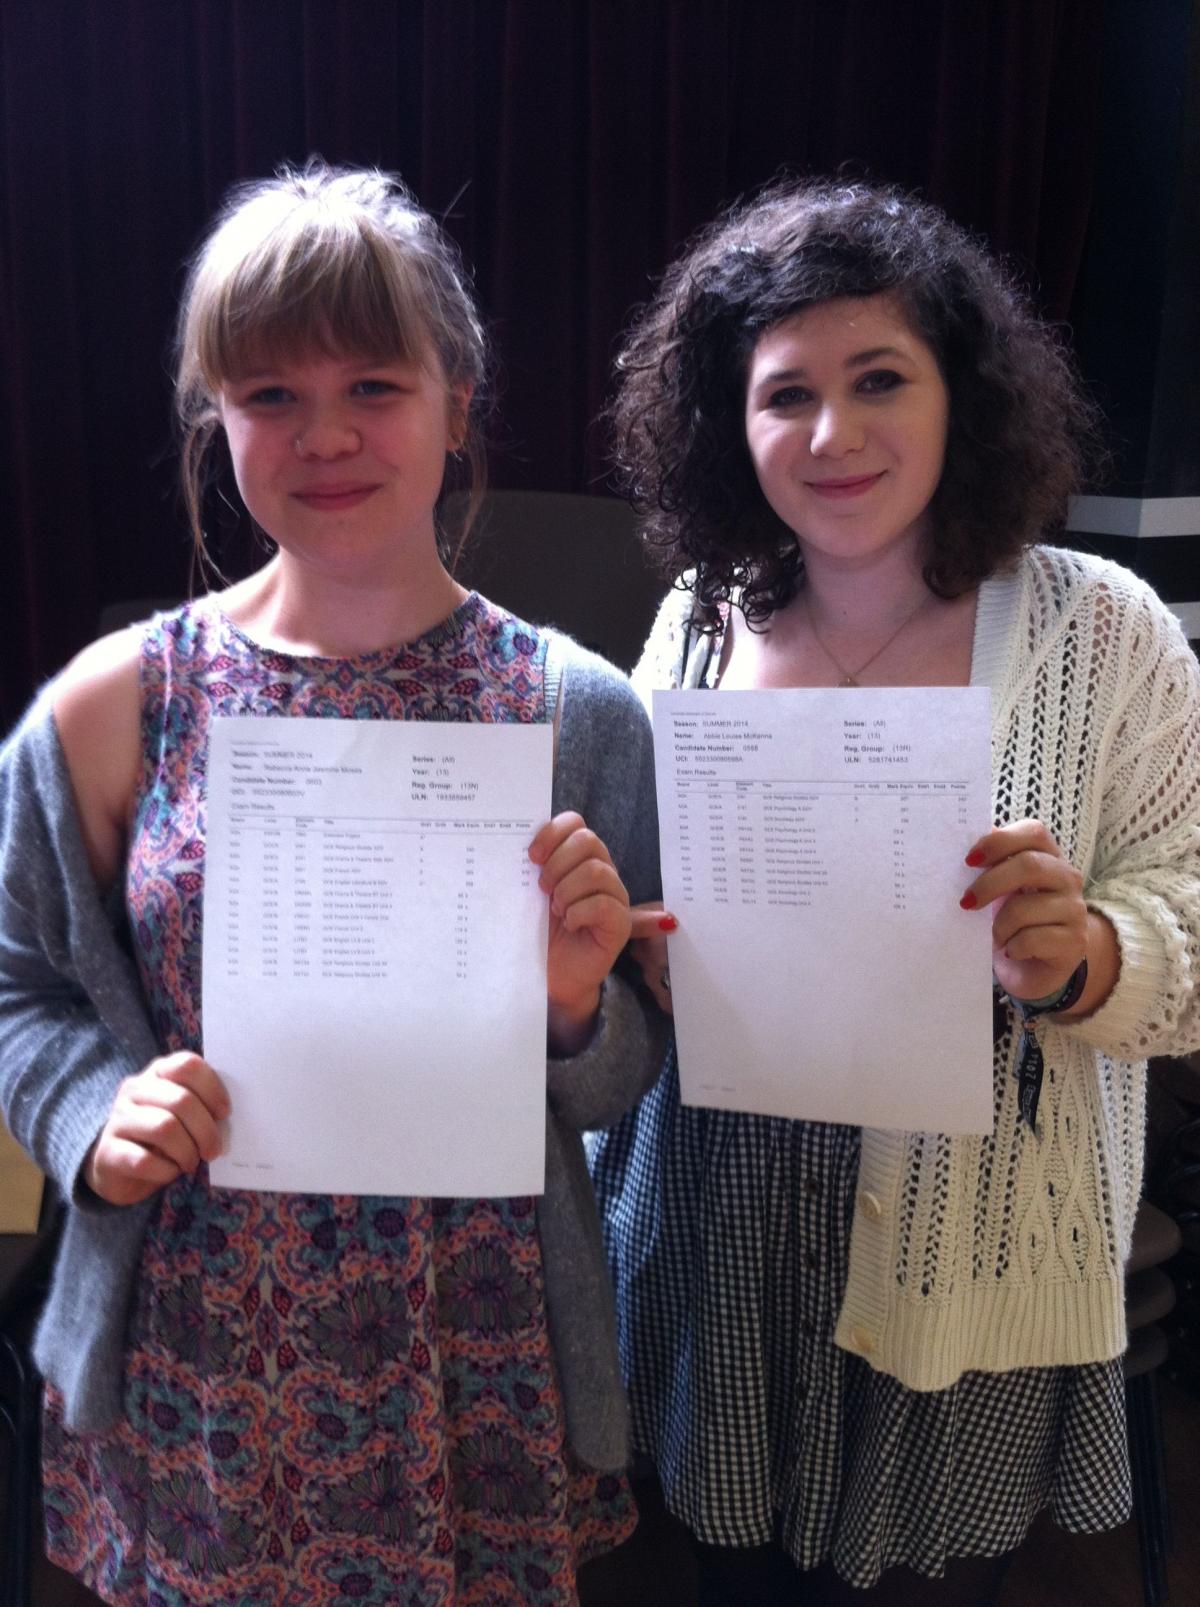 A Level results day 2014 at Parkstone Grammar